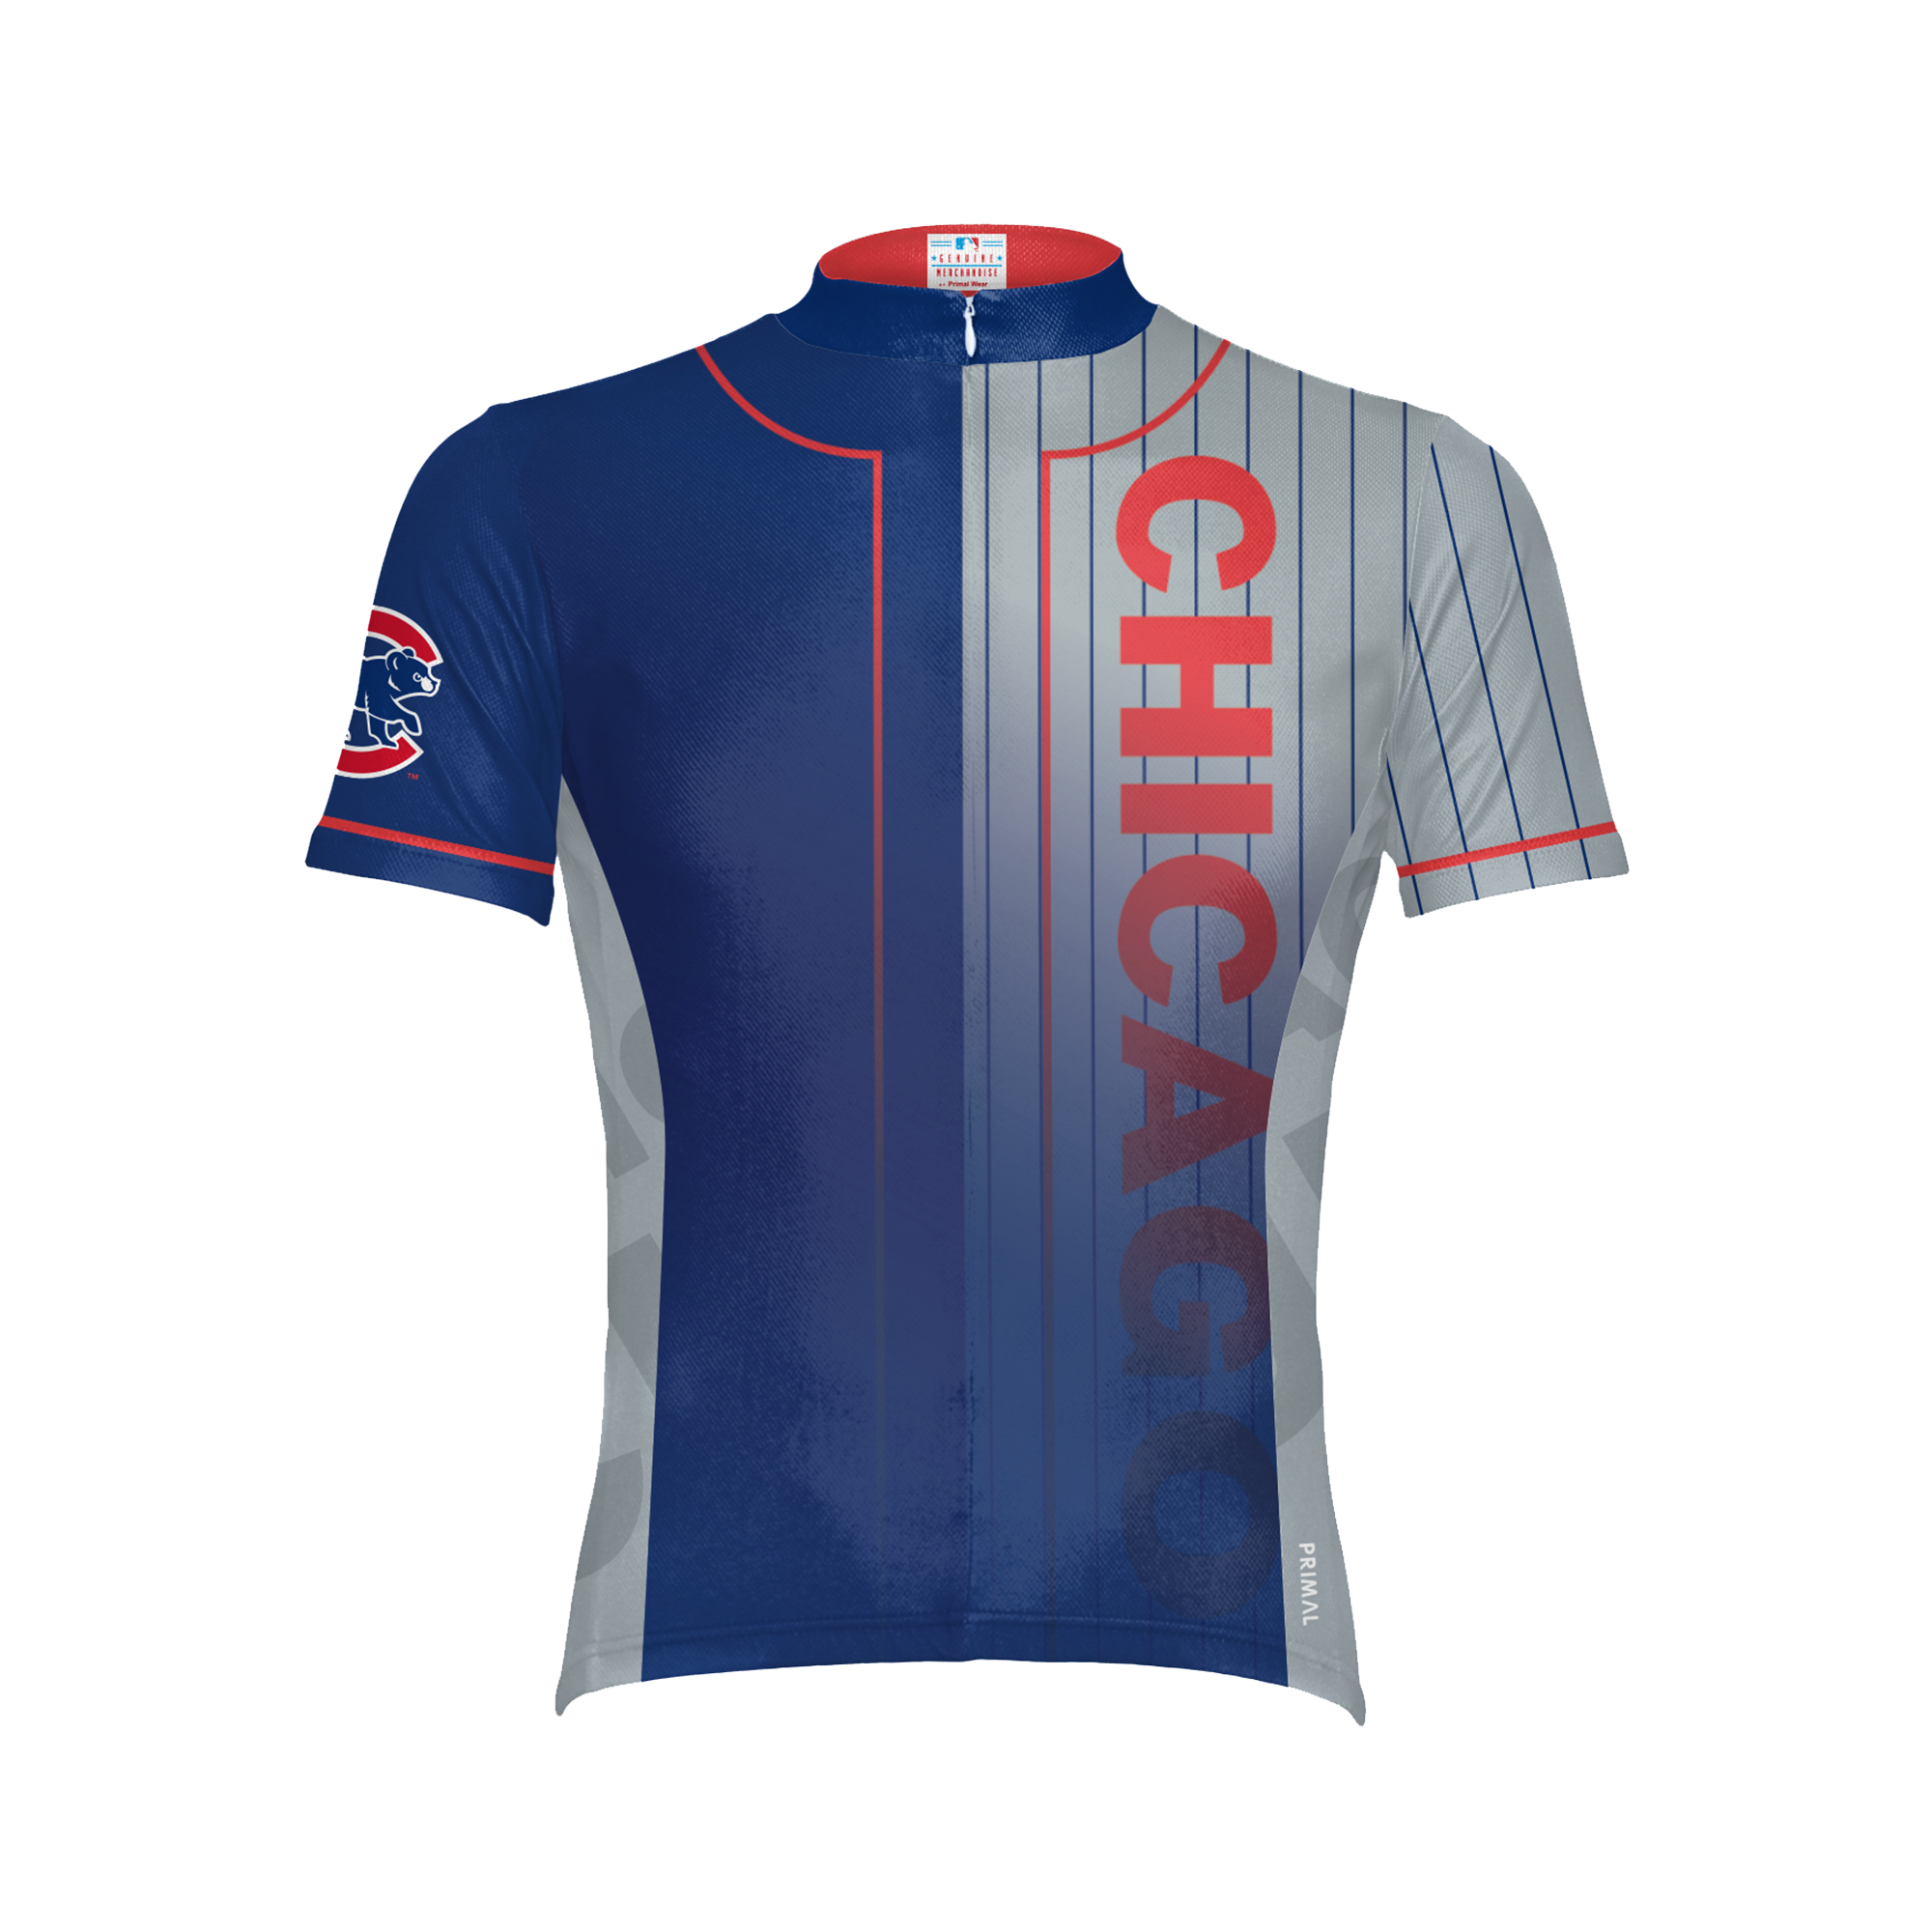 chicago cubs military jersey